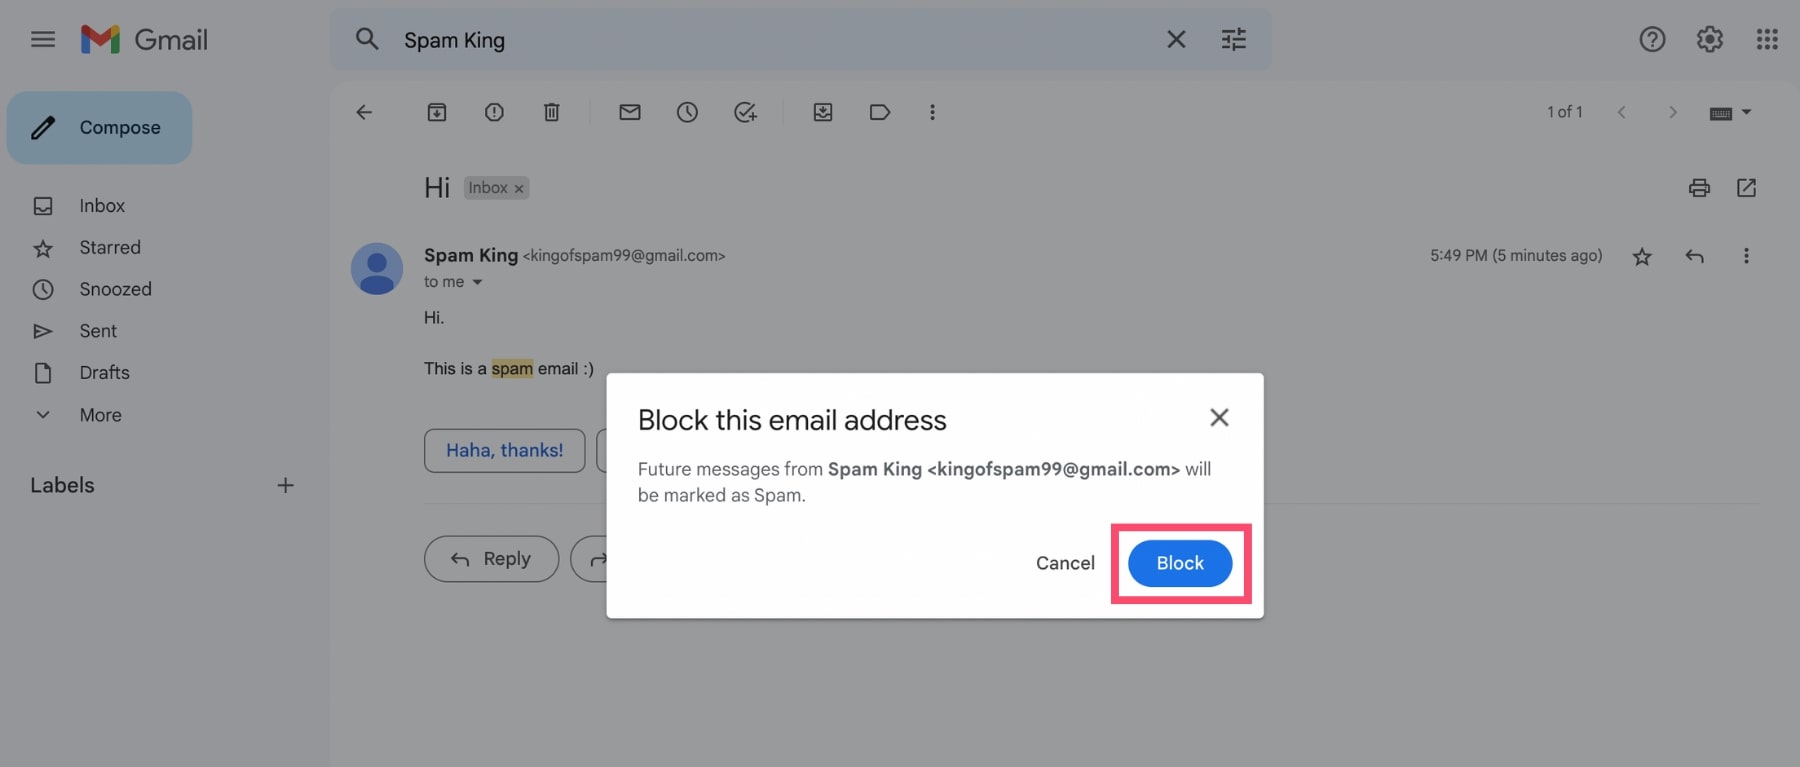 How to block an email address on Gmail